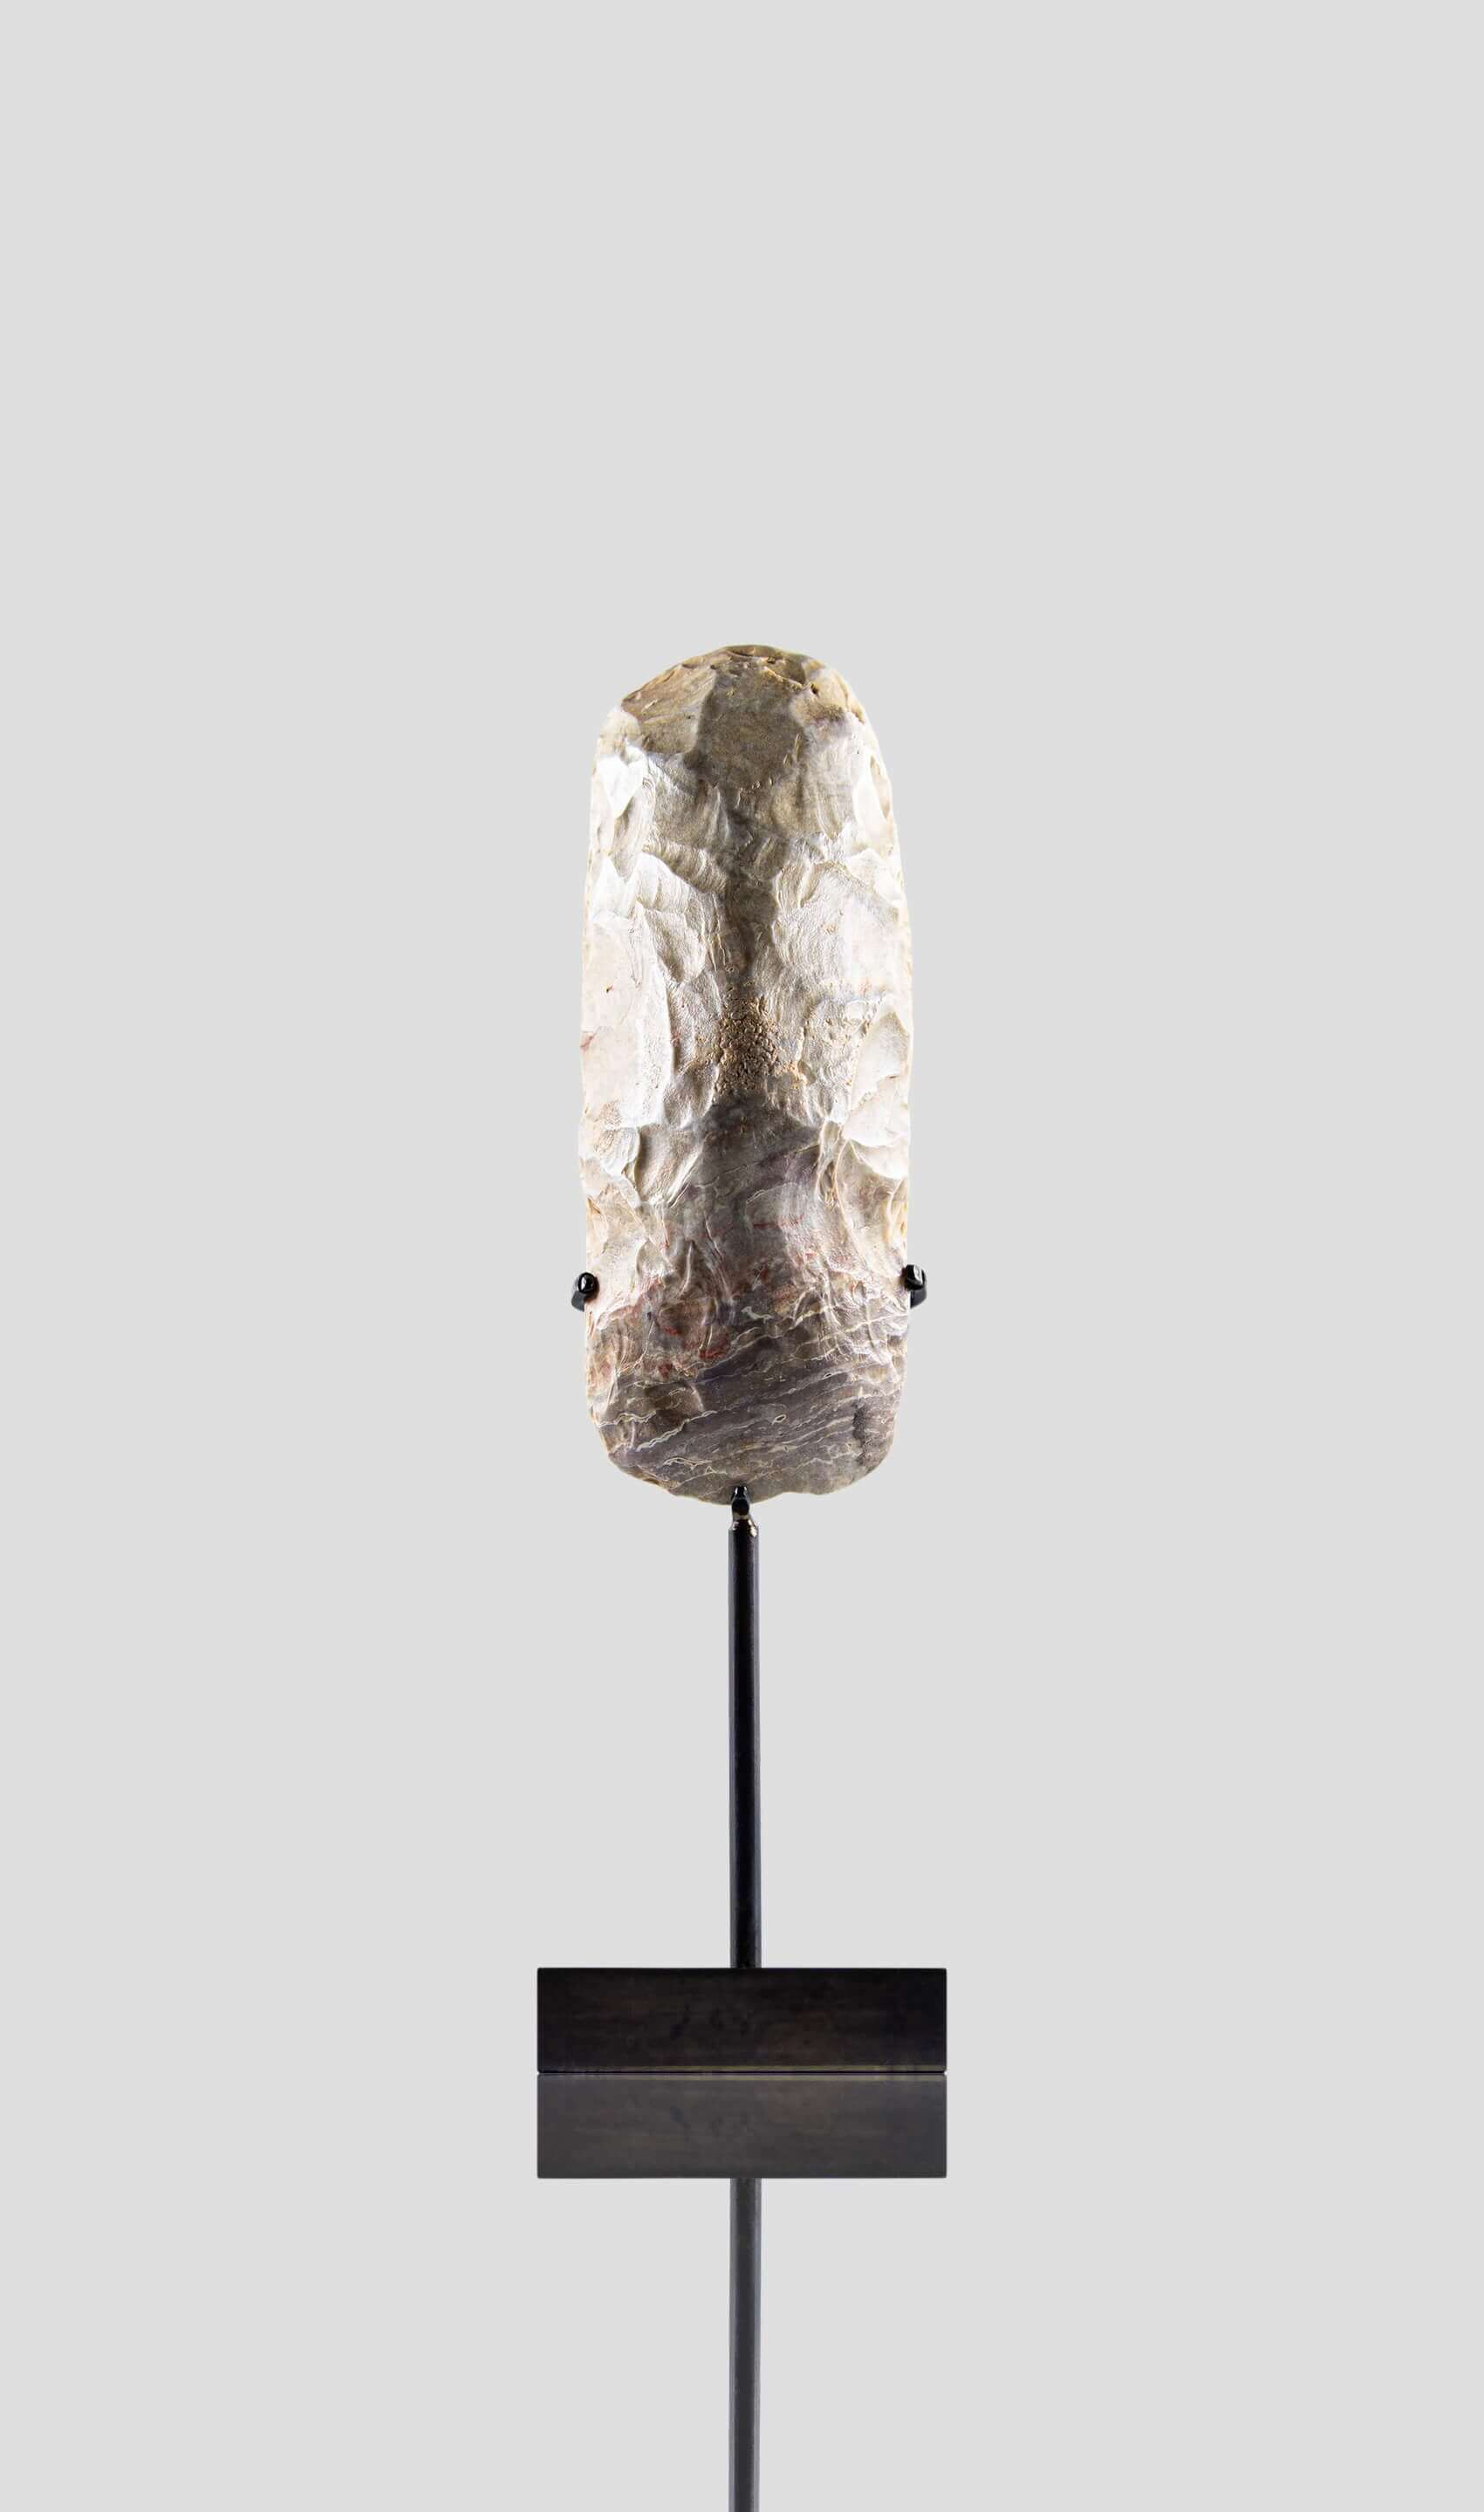 Artefact Neolithic Capsian Hand Axe [8,500 BC] 220mm